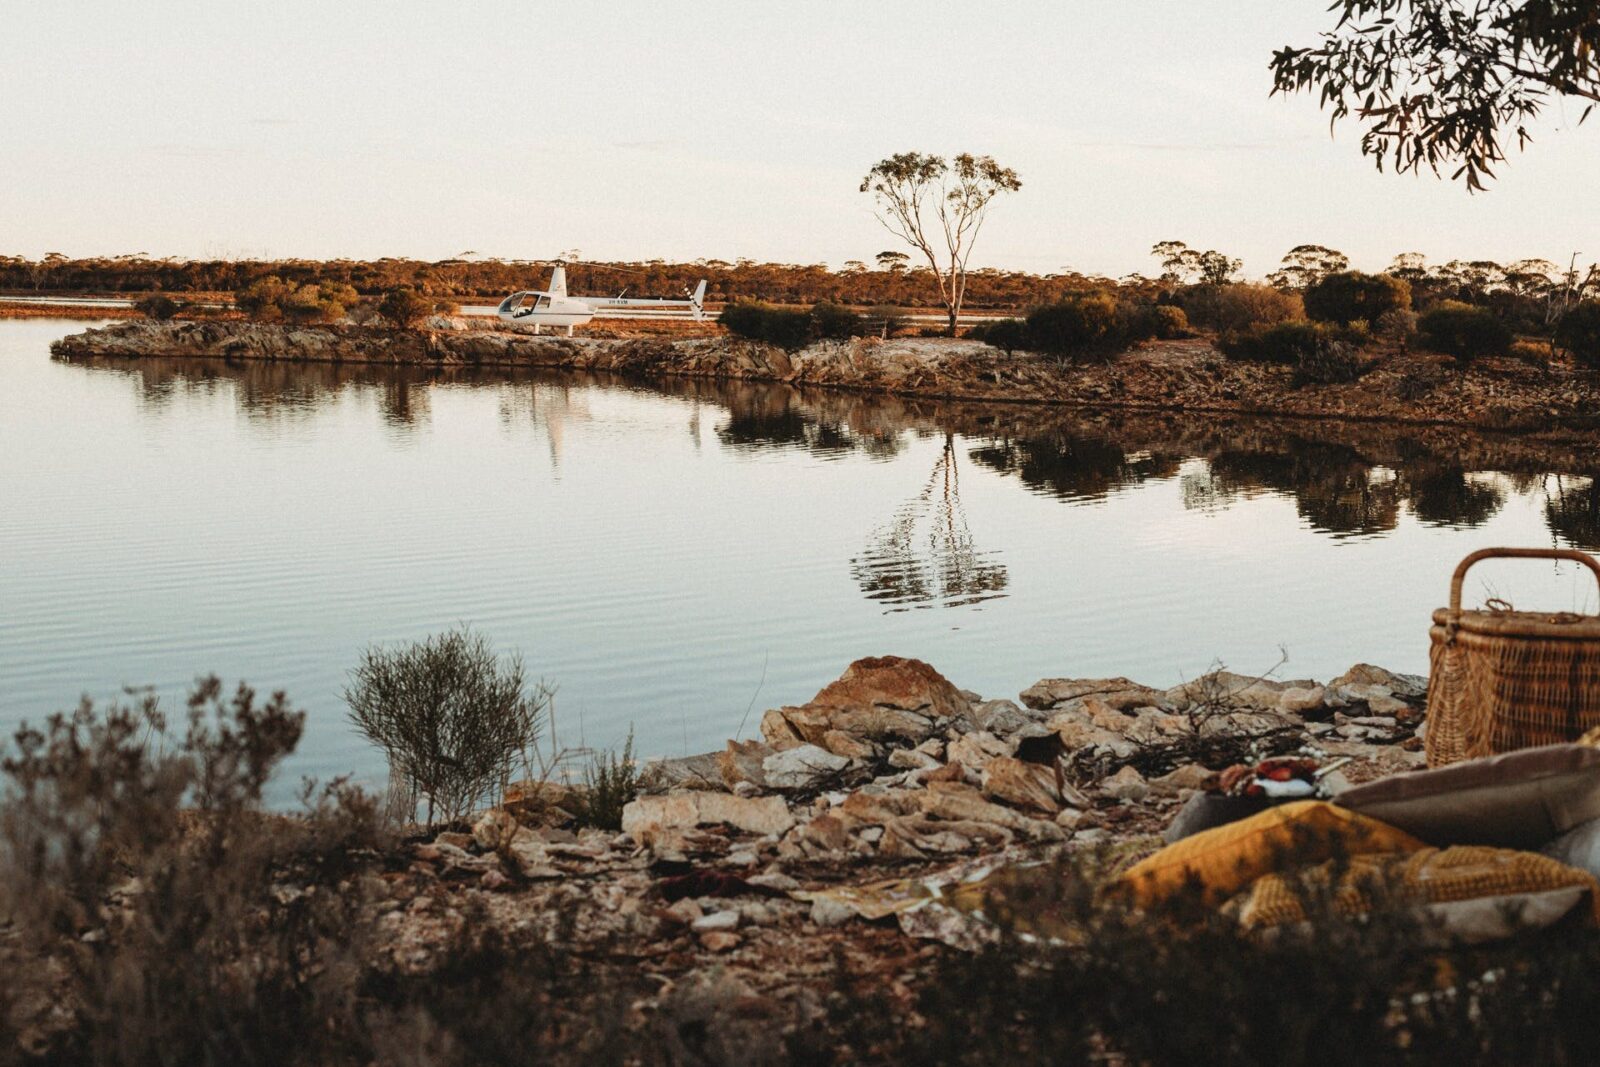 Picnic on the Lake with Helicopter and Bushland